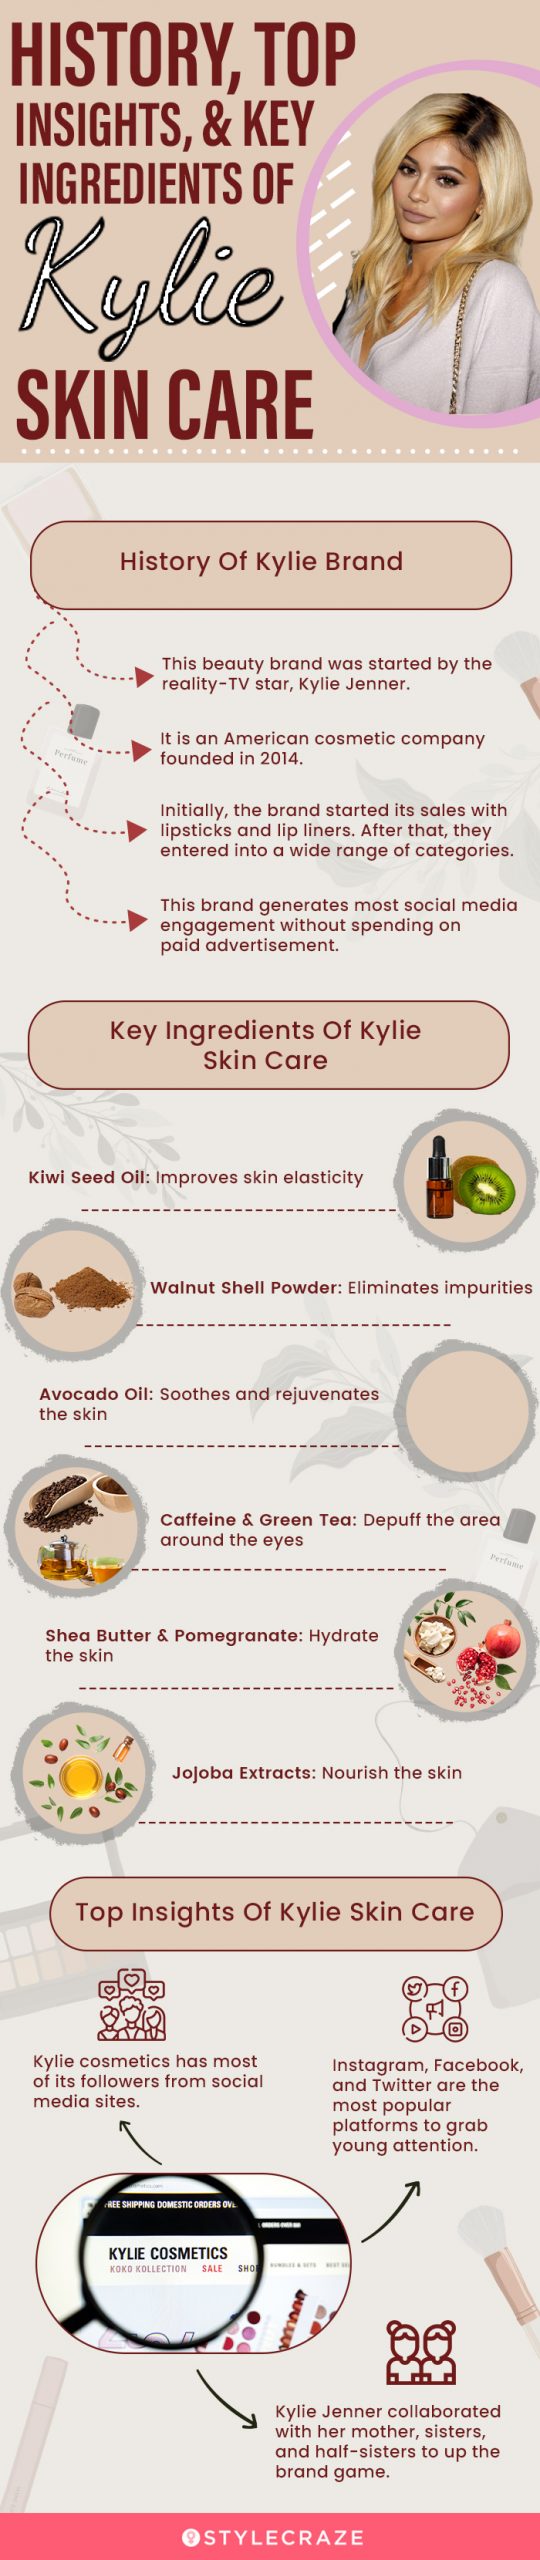 History, Top Insights Of Kylie Skin Care  [infographic]